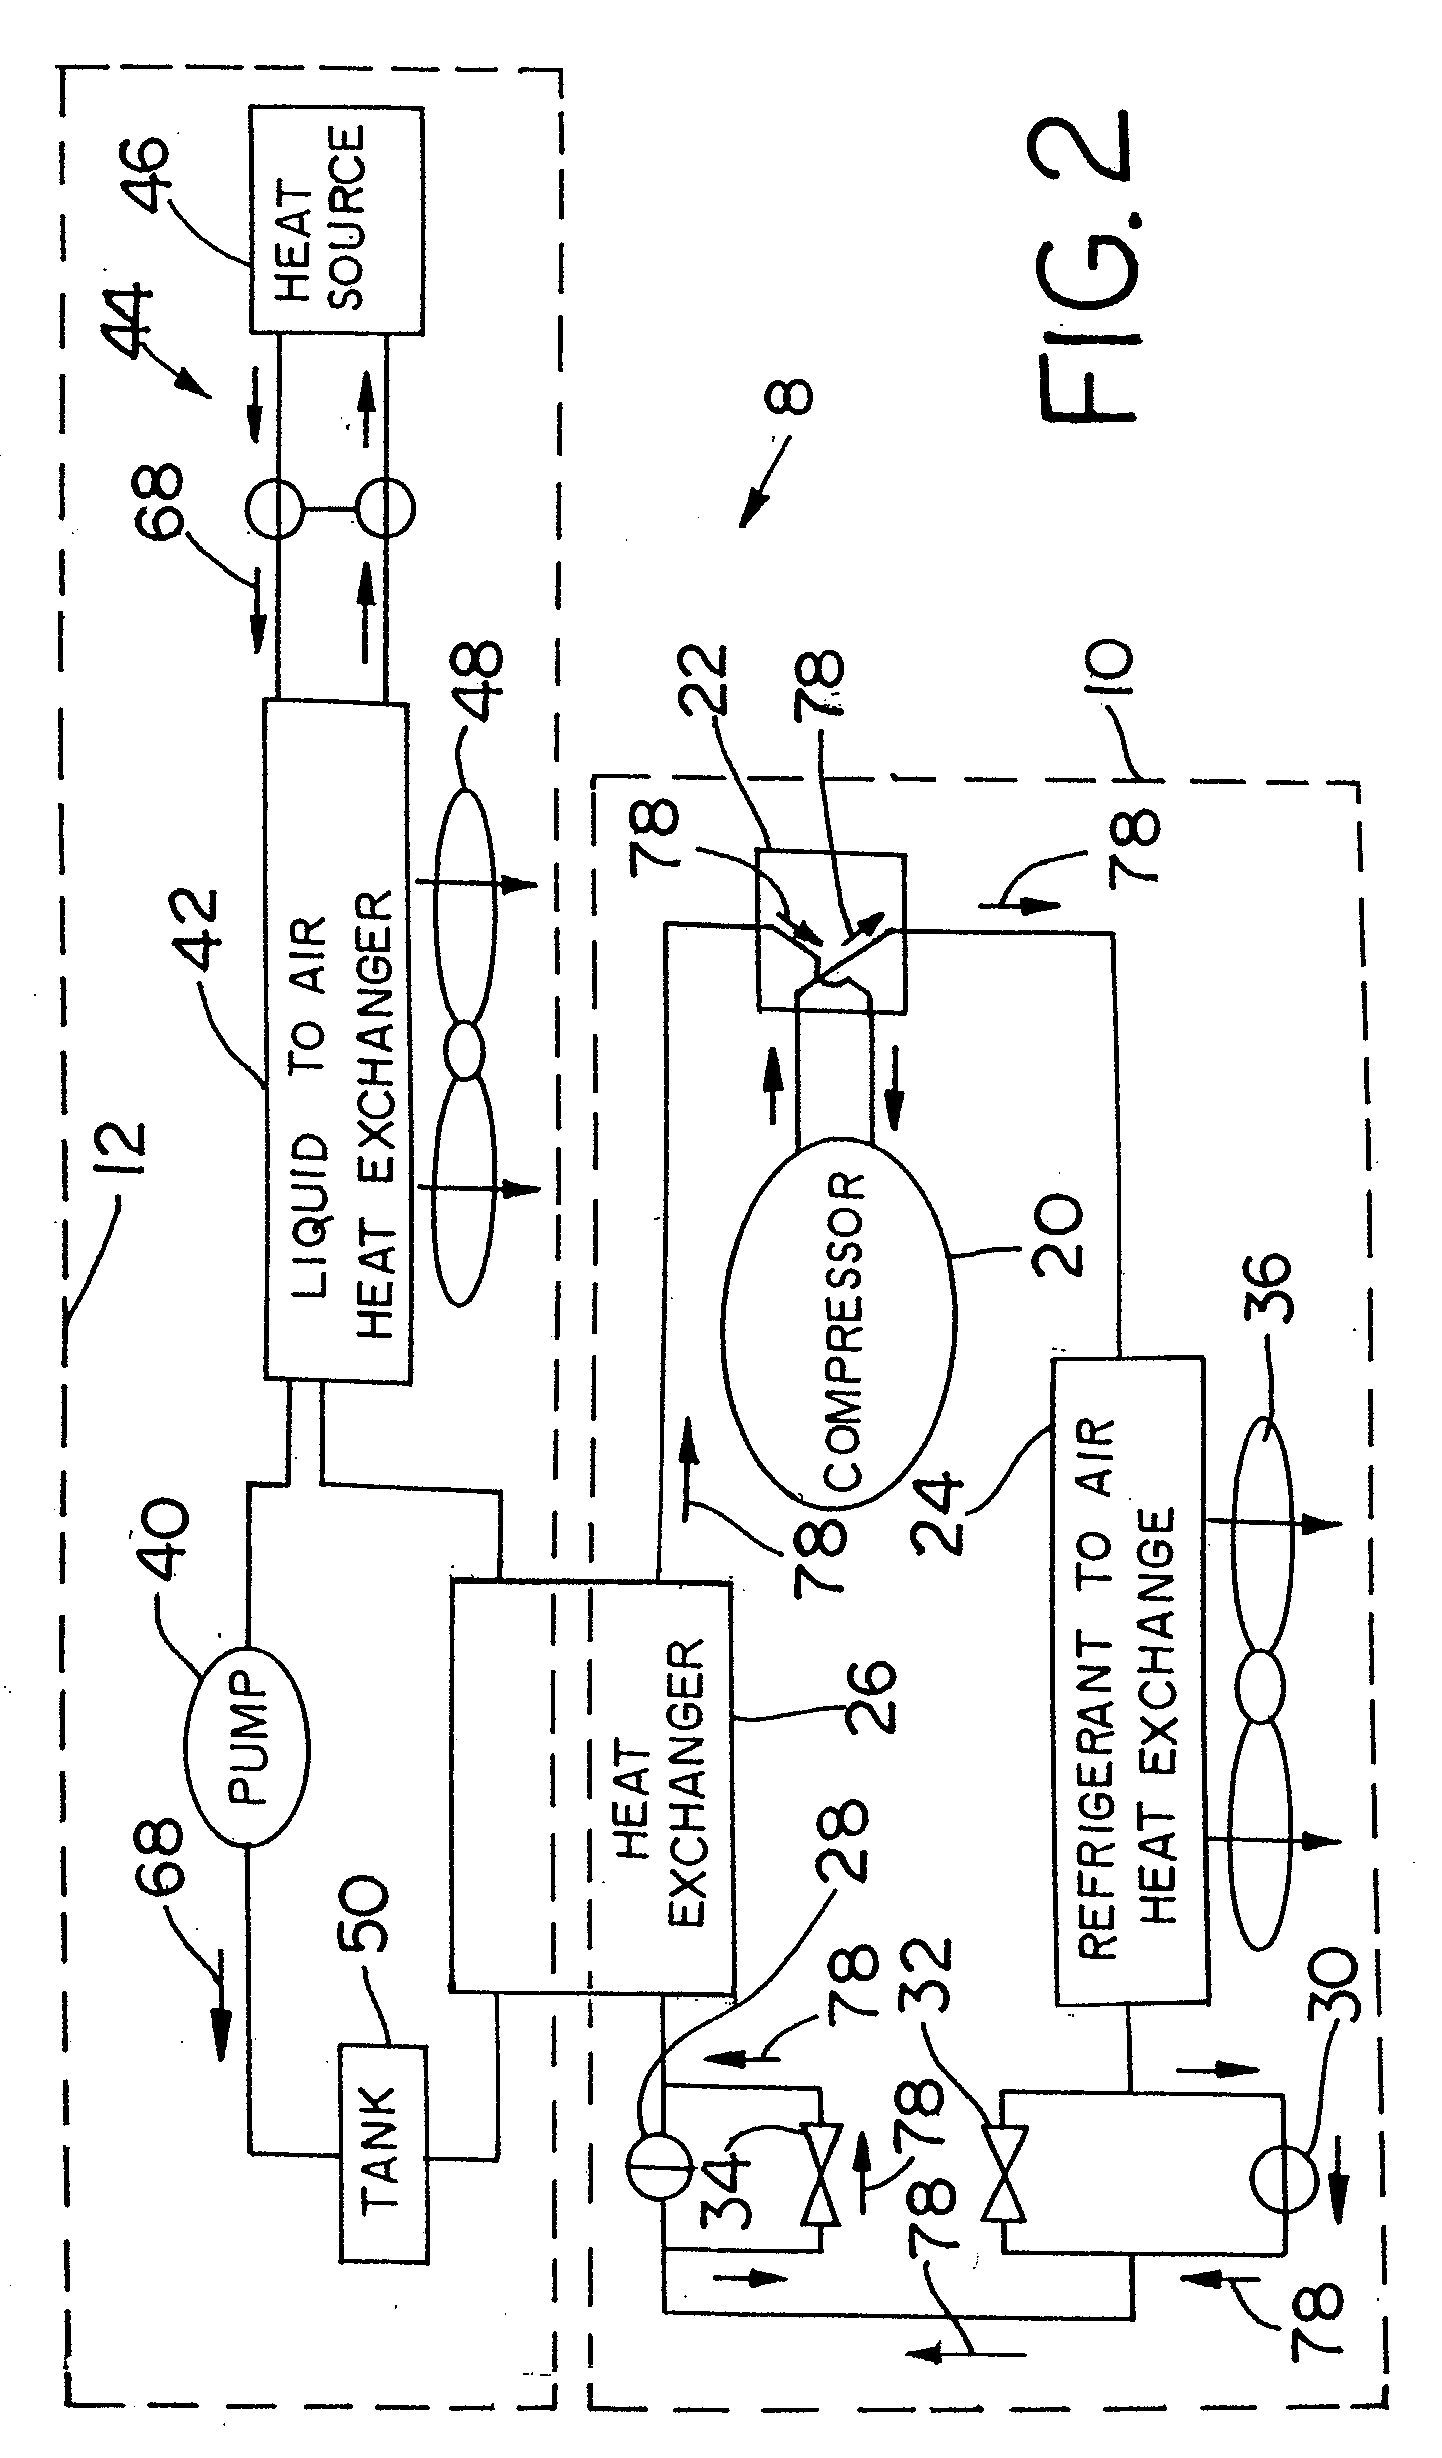 Combined Heating & Air Conditioning System for Buses Utilizing an Electrified Compressor Having a Modular High-Pressure Unit